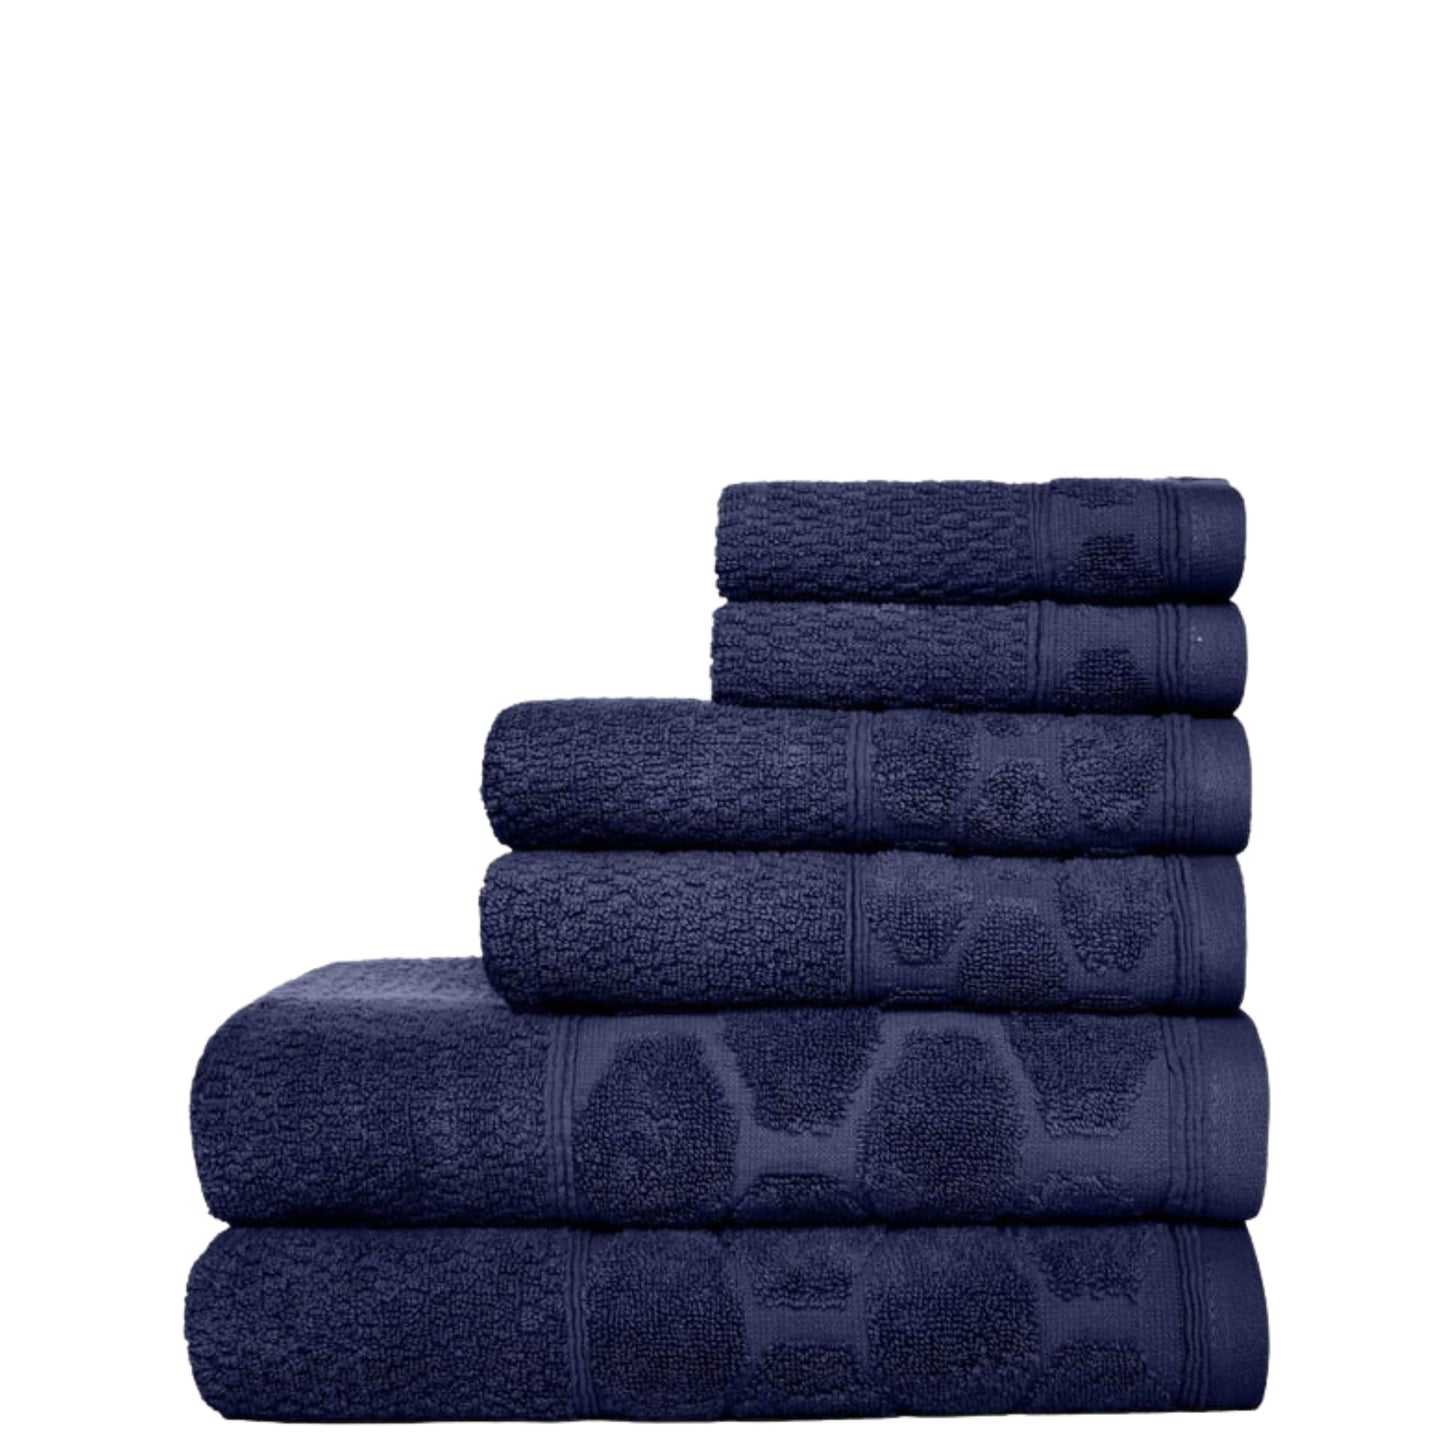 HYPED Towels 6 Pieces / Navy HYPED - Wildwood 6 Piece Bath Towel Set